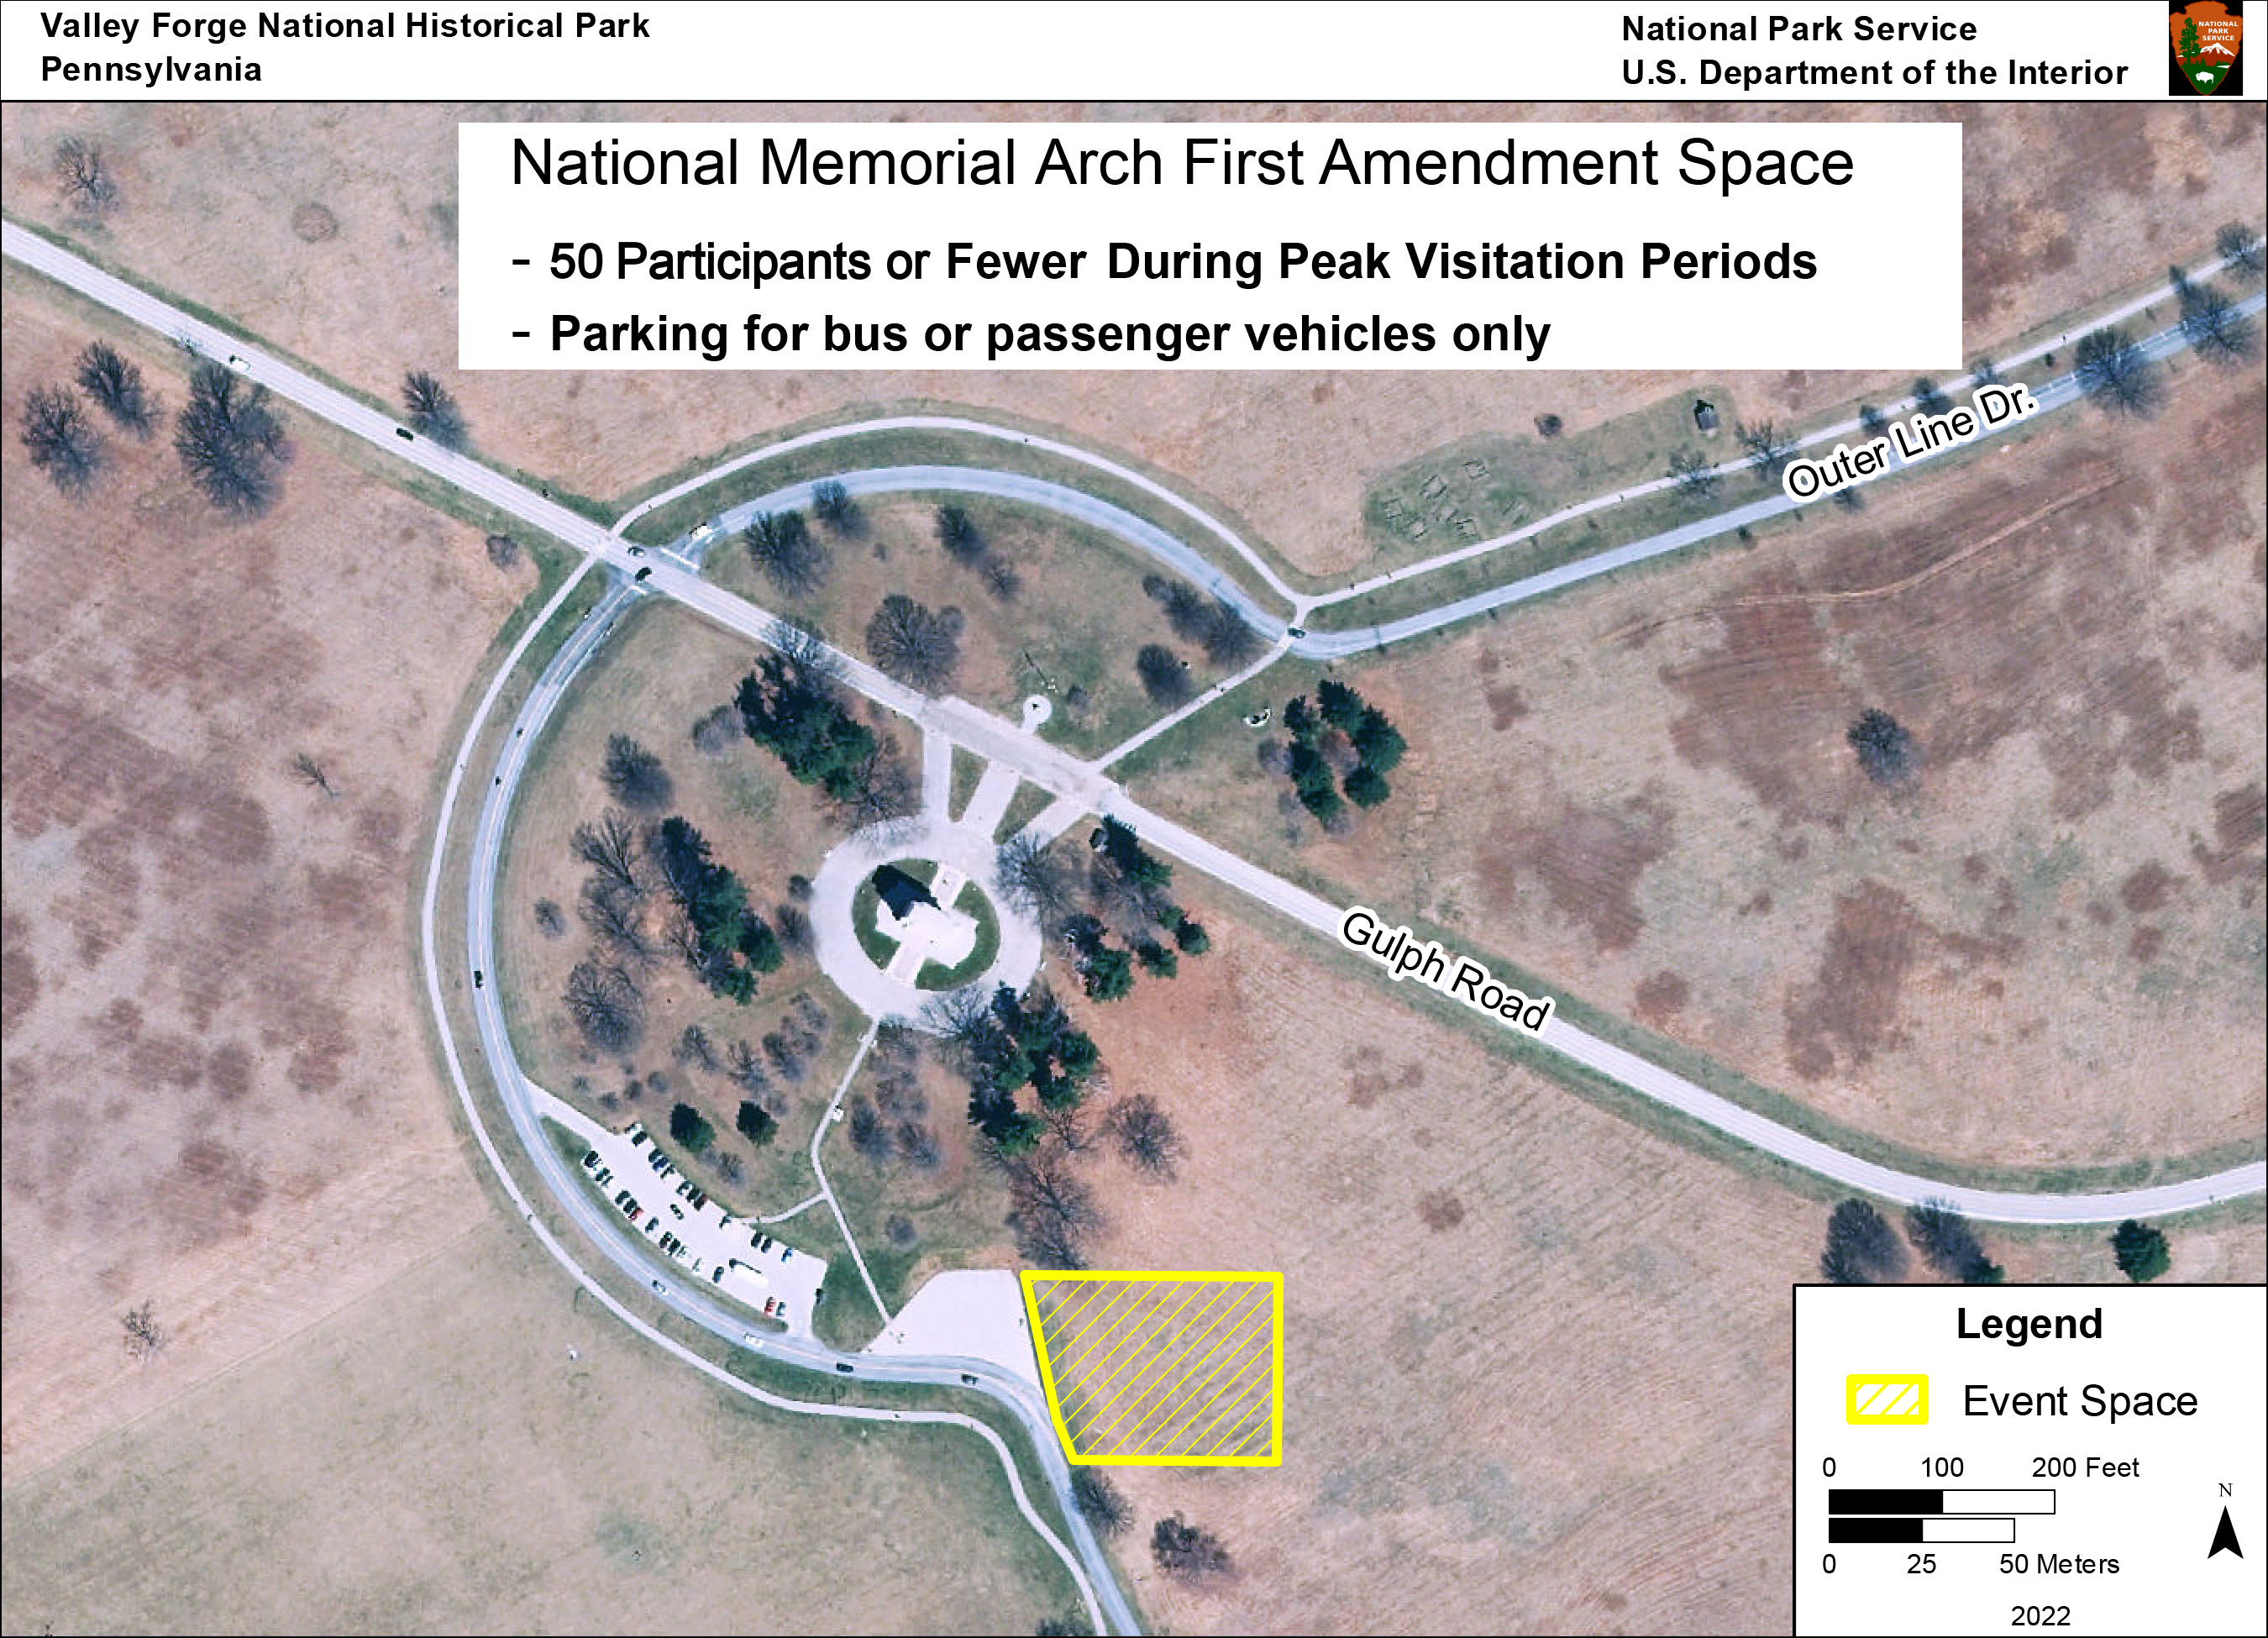 top down view of national memorial arch area. section east of parking lot is outlined and highlighted